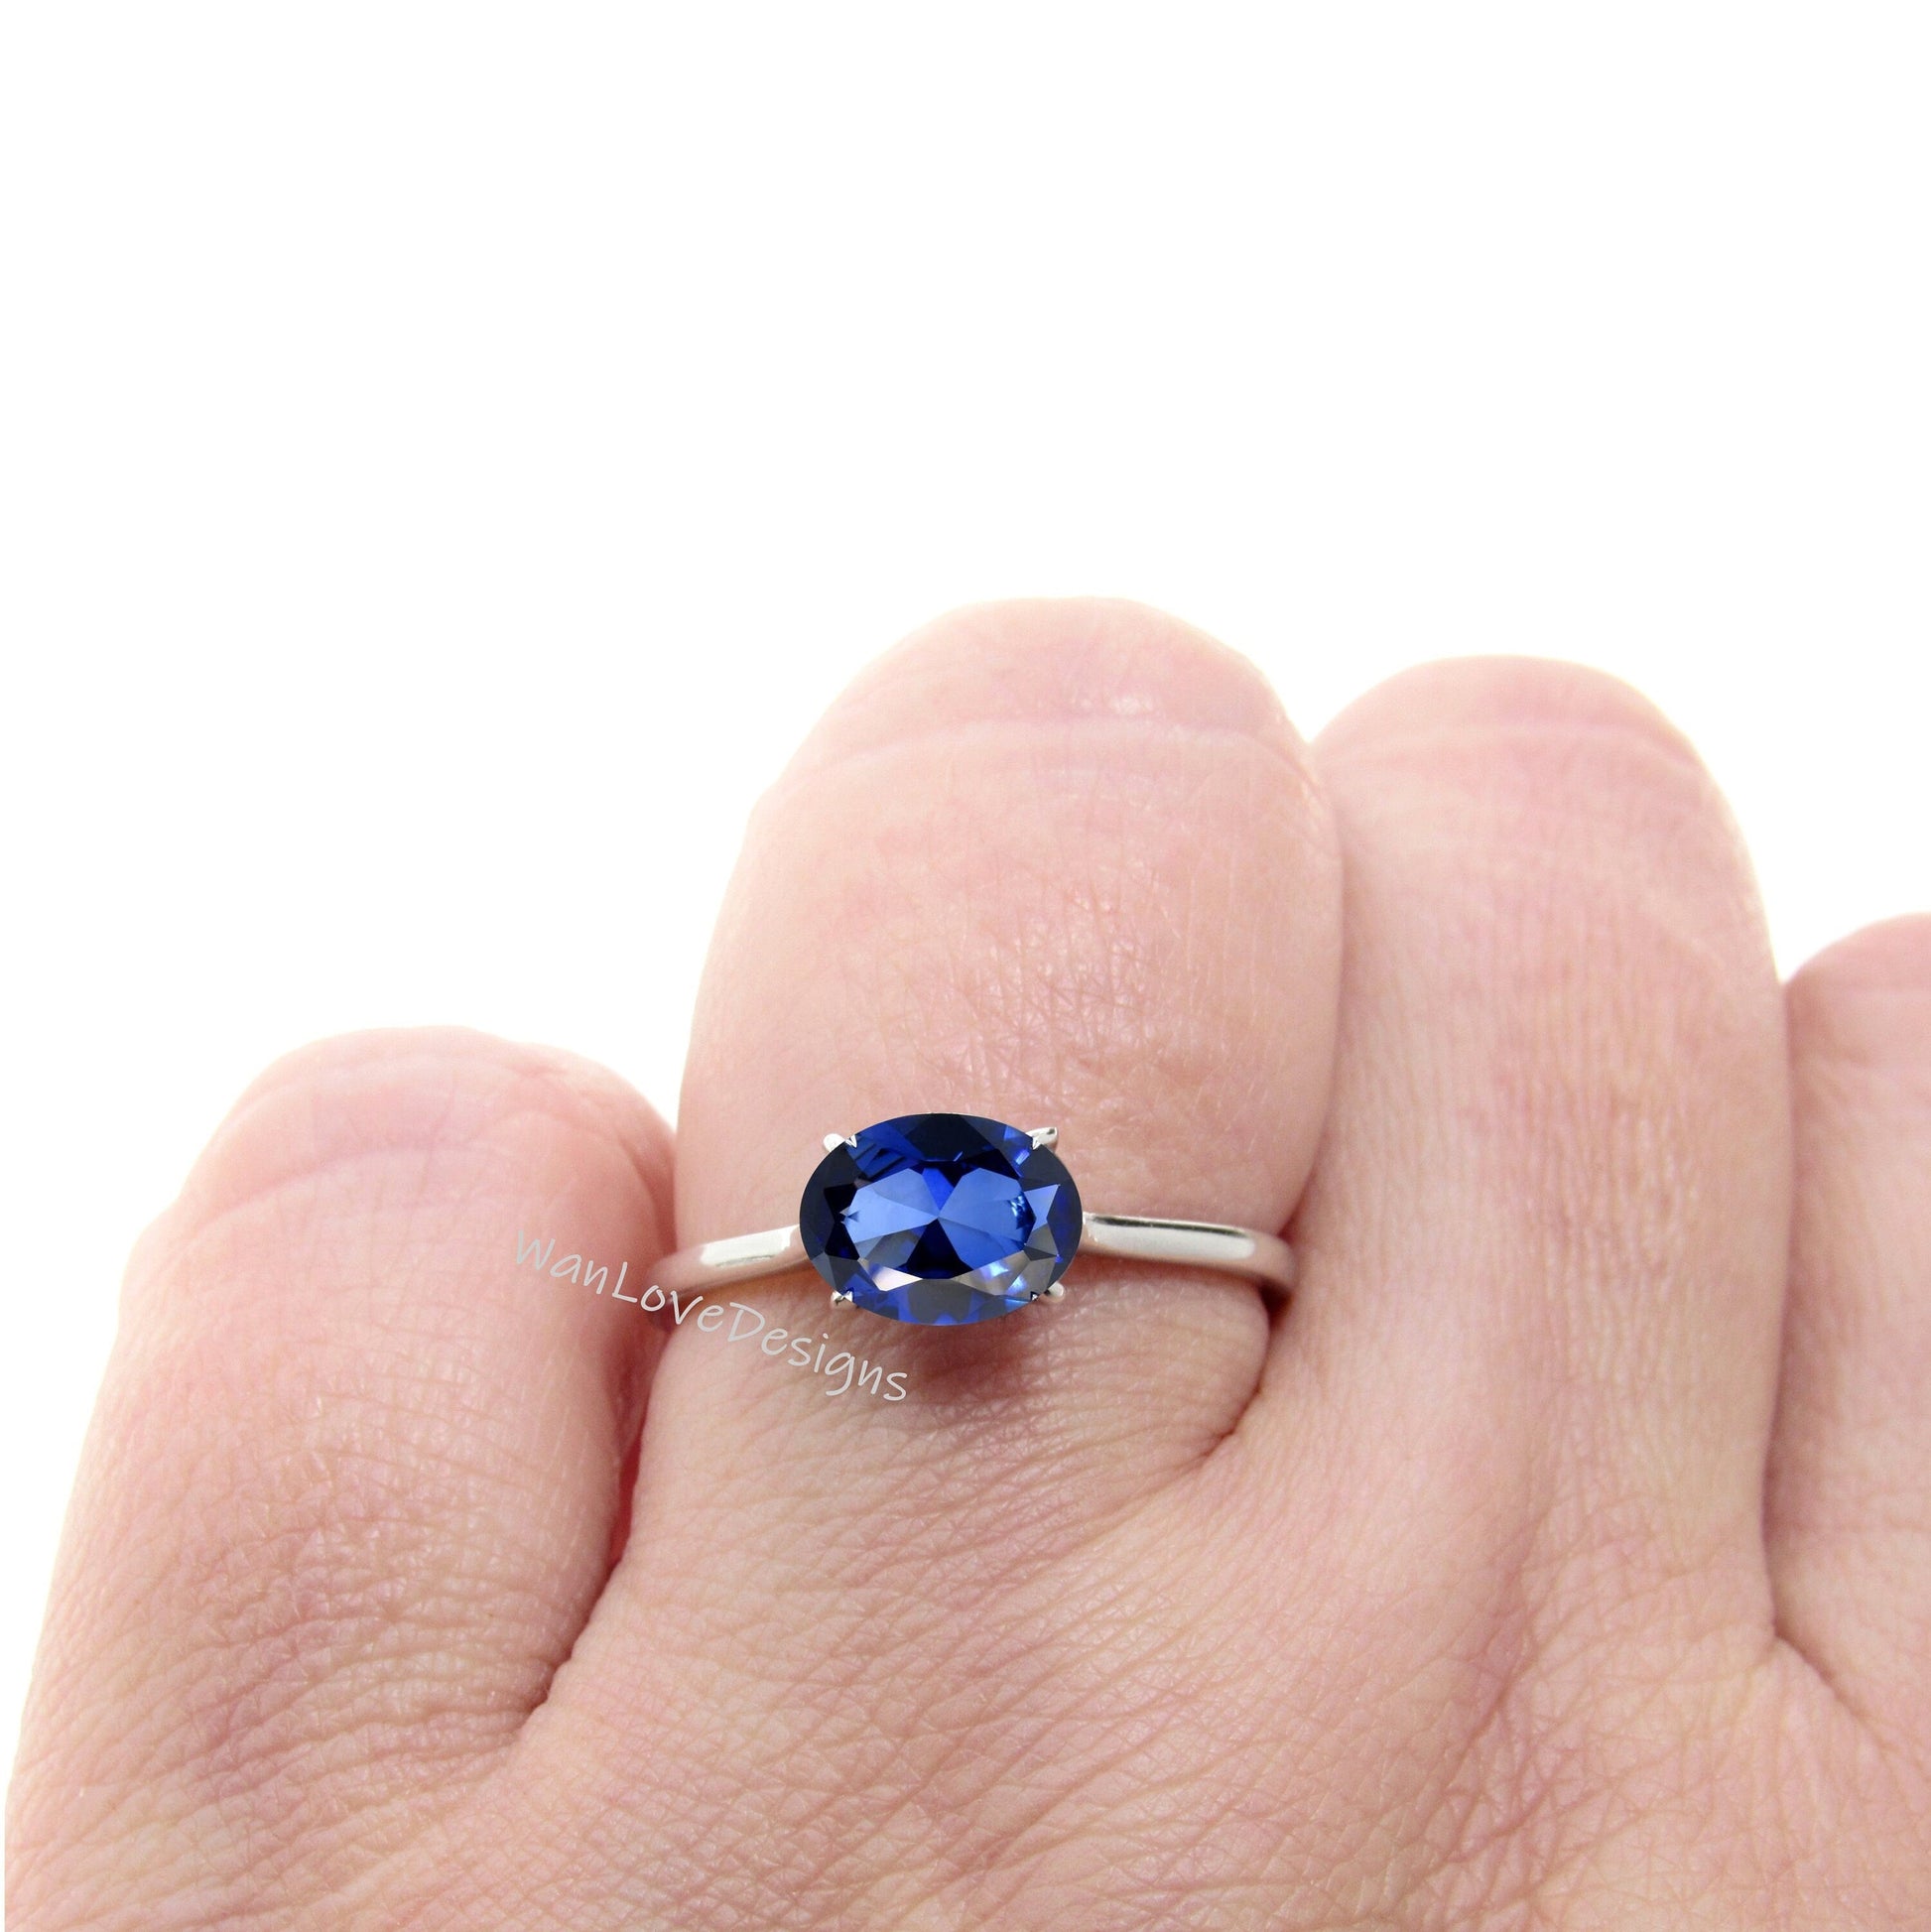 oval blue sapphire ring, blue sapphire engagement ring, east west setting, oval cut sapphire ring Wan Love Designs